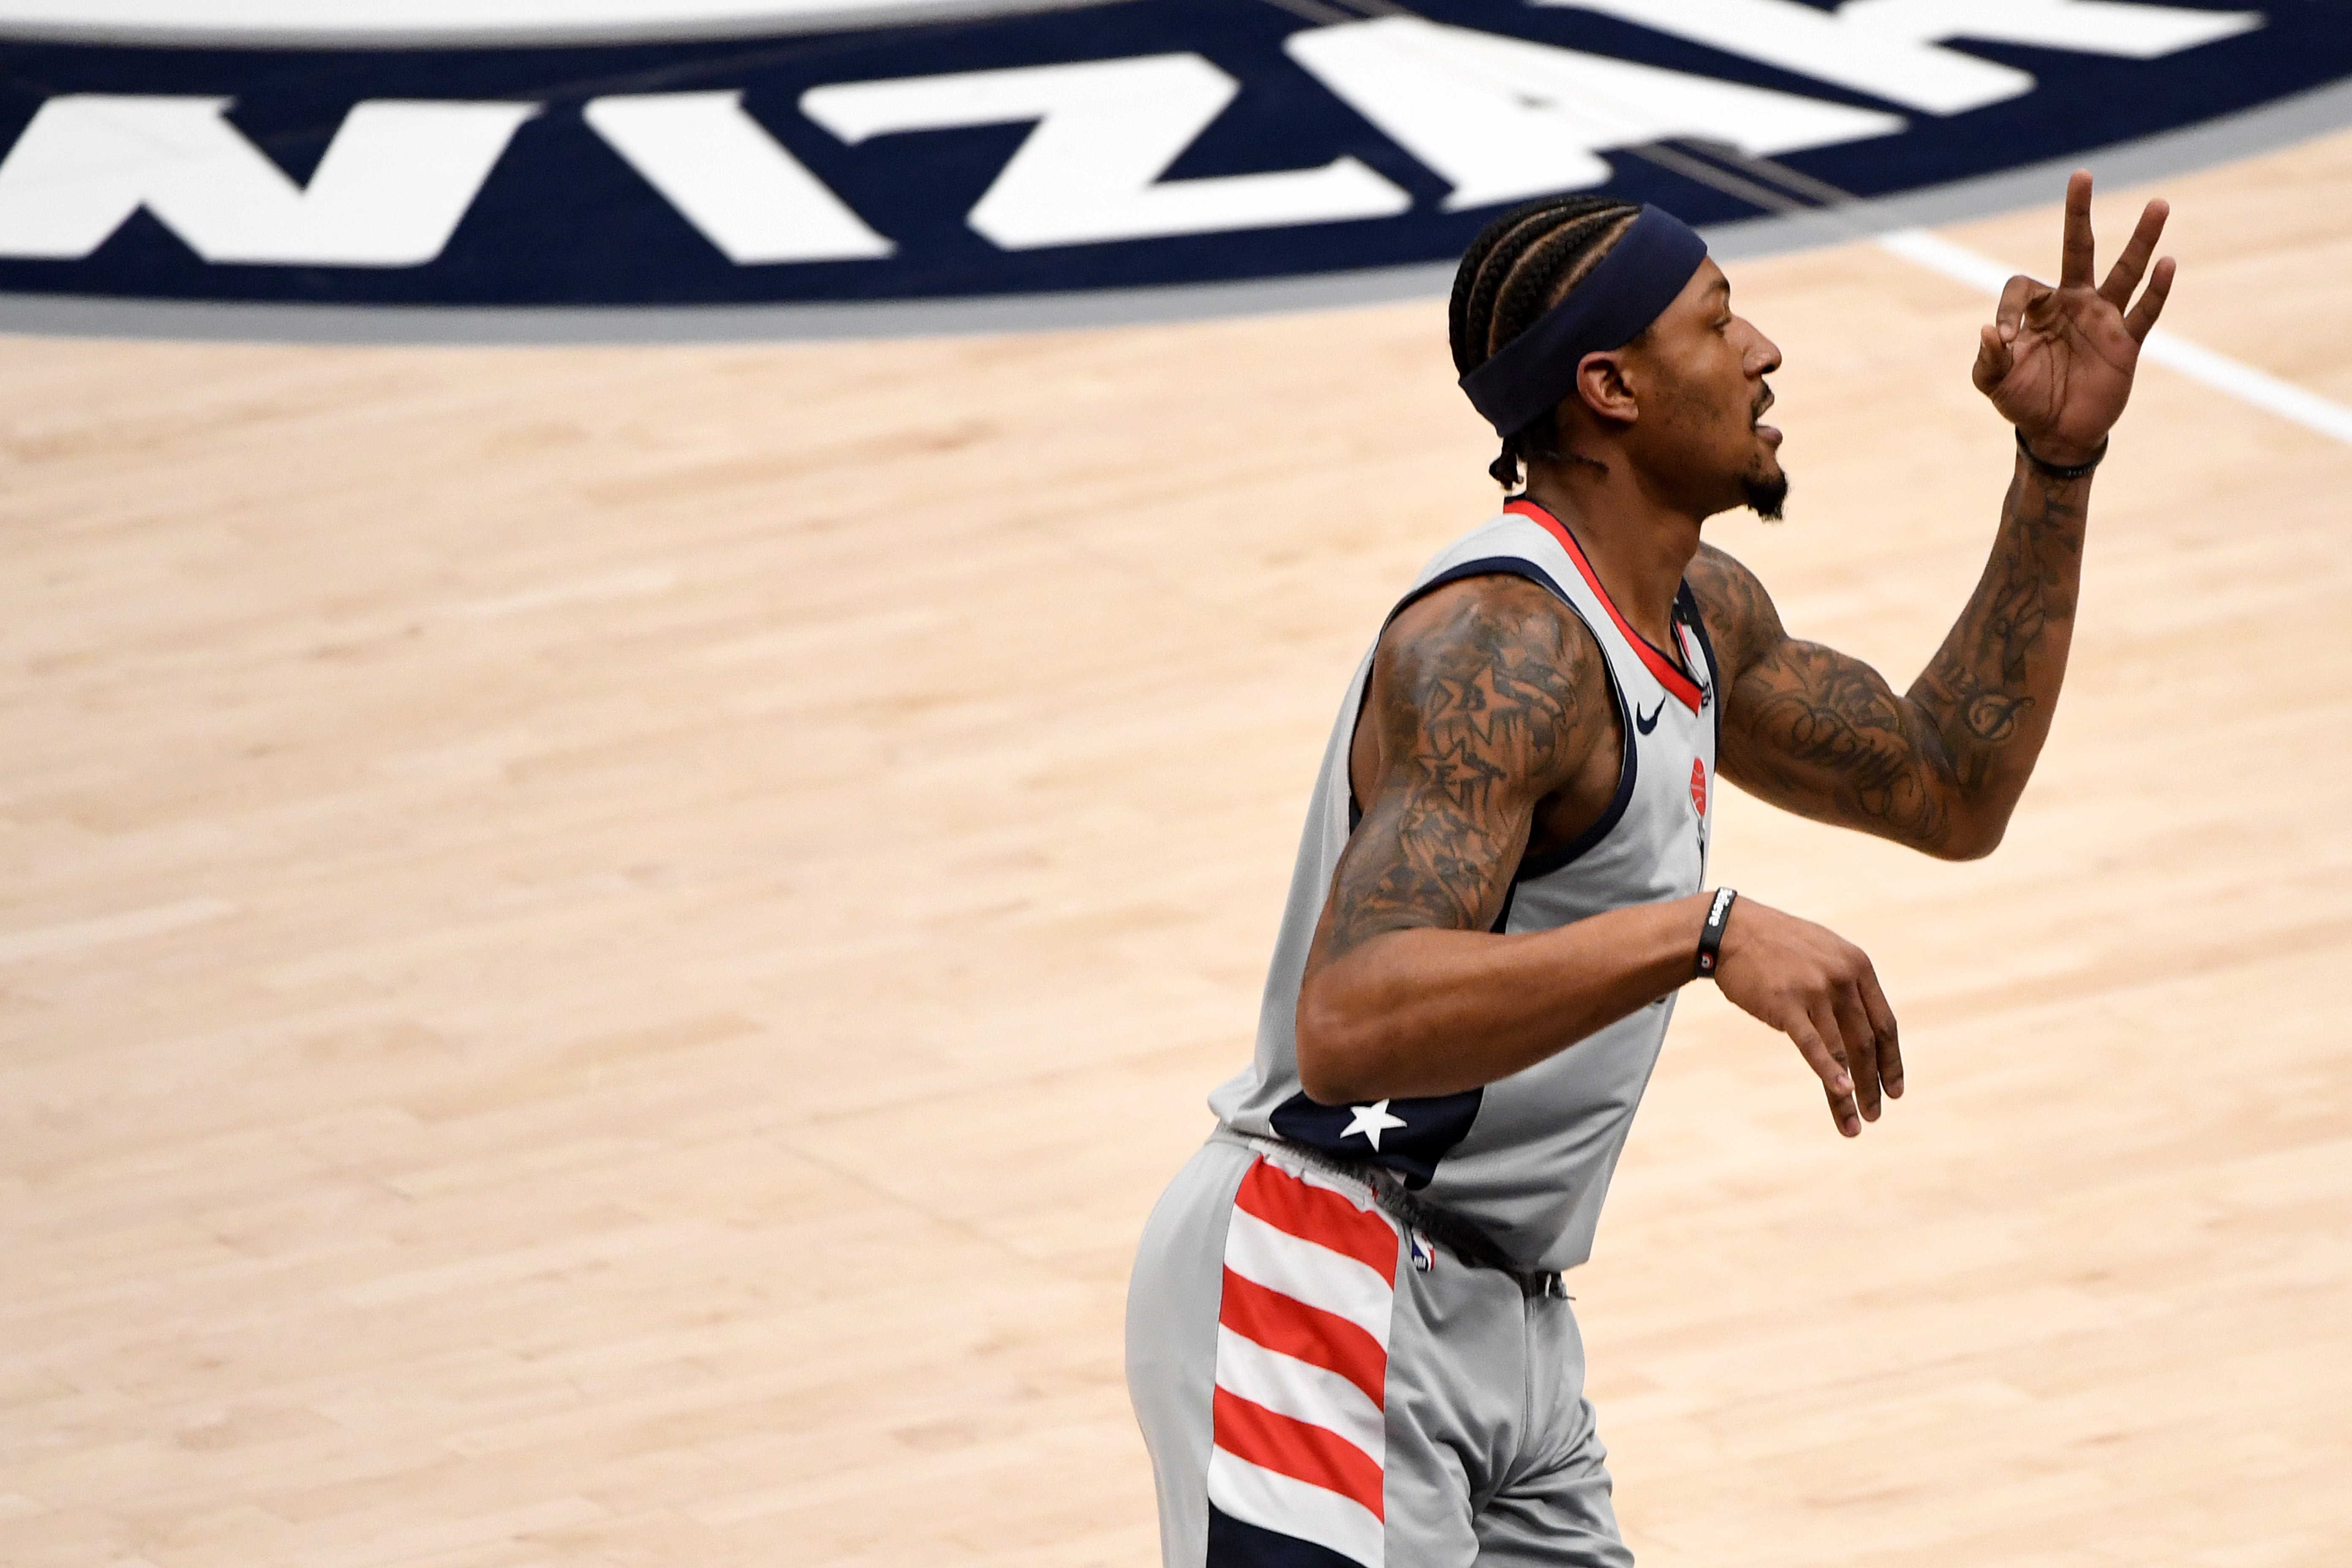 Wizards star Bradley Beal celebrates a three-pointer during the NBA Play-In Torunament